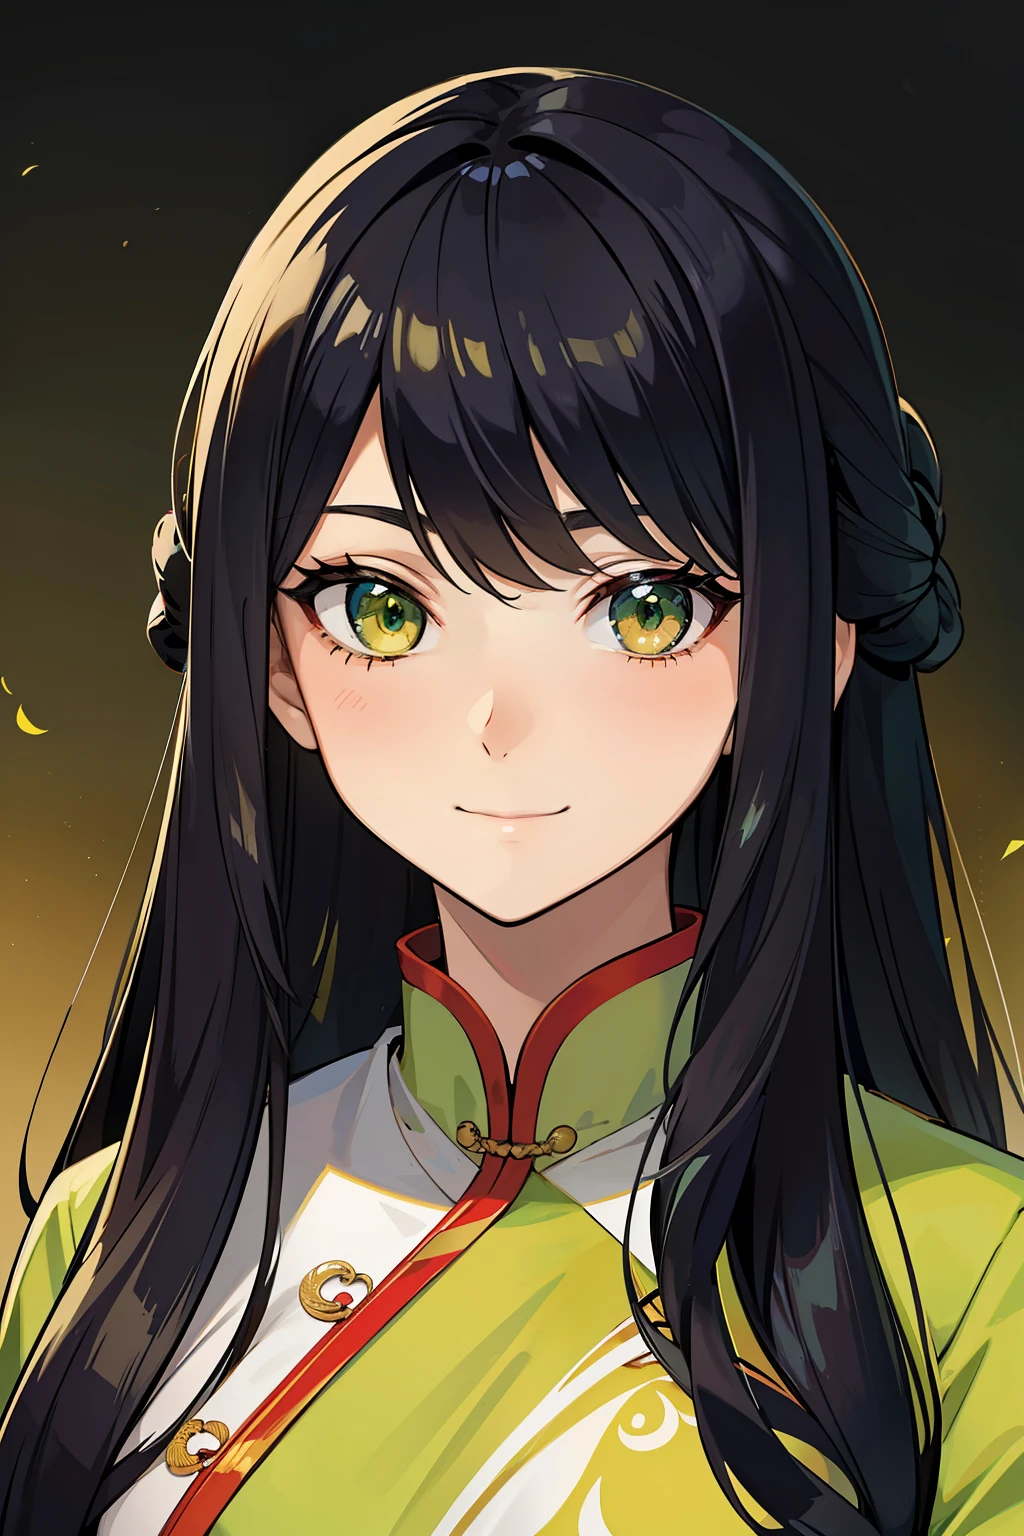 (high-quality, breathtaking),(expressive eyes, perfect face) portrait, 1girl, female, solo, adult woman, age late 20's, black hair, green yellow eye color, long hair length, soft wavy hair, gentle smile, loose hair, side bangs, looking at viewer, portrait, happy expression, fantasy clothing, elegant, mature, height 5"6, Chinese attire, eastern oriental clothes, Ruan Mei
